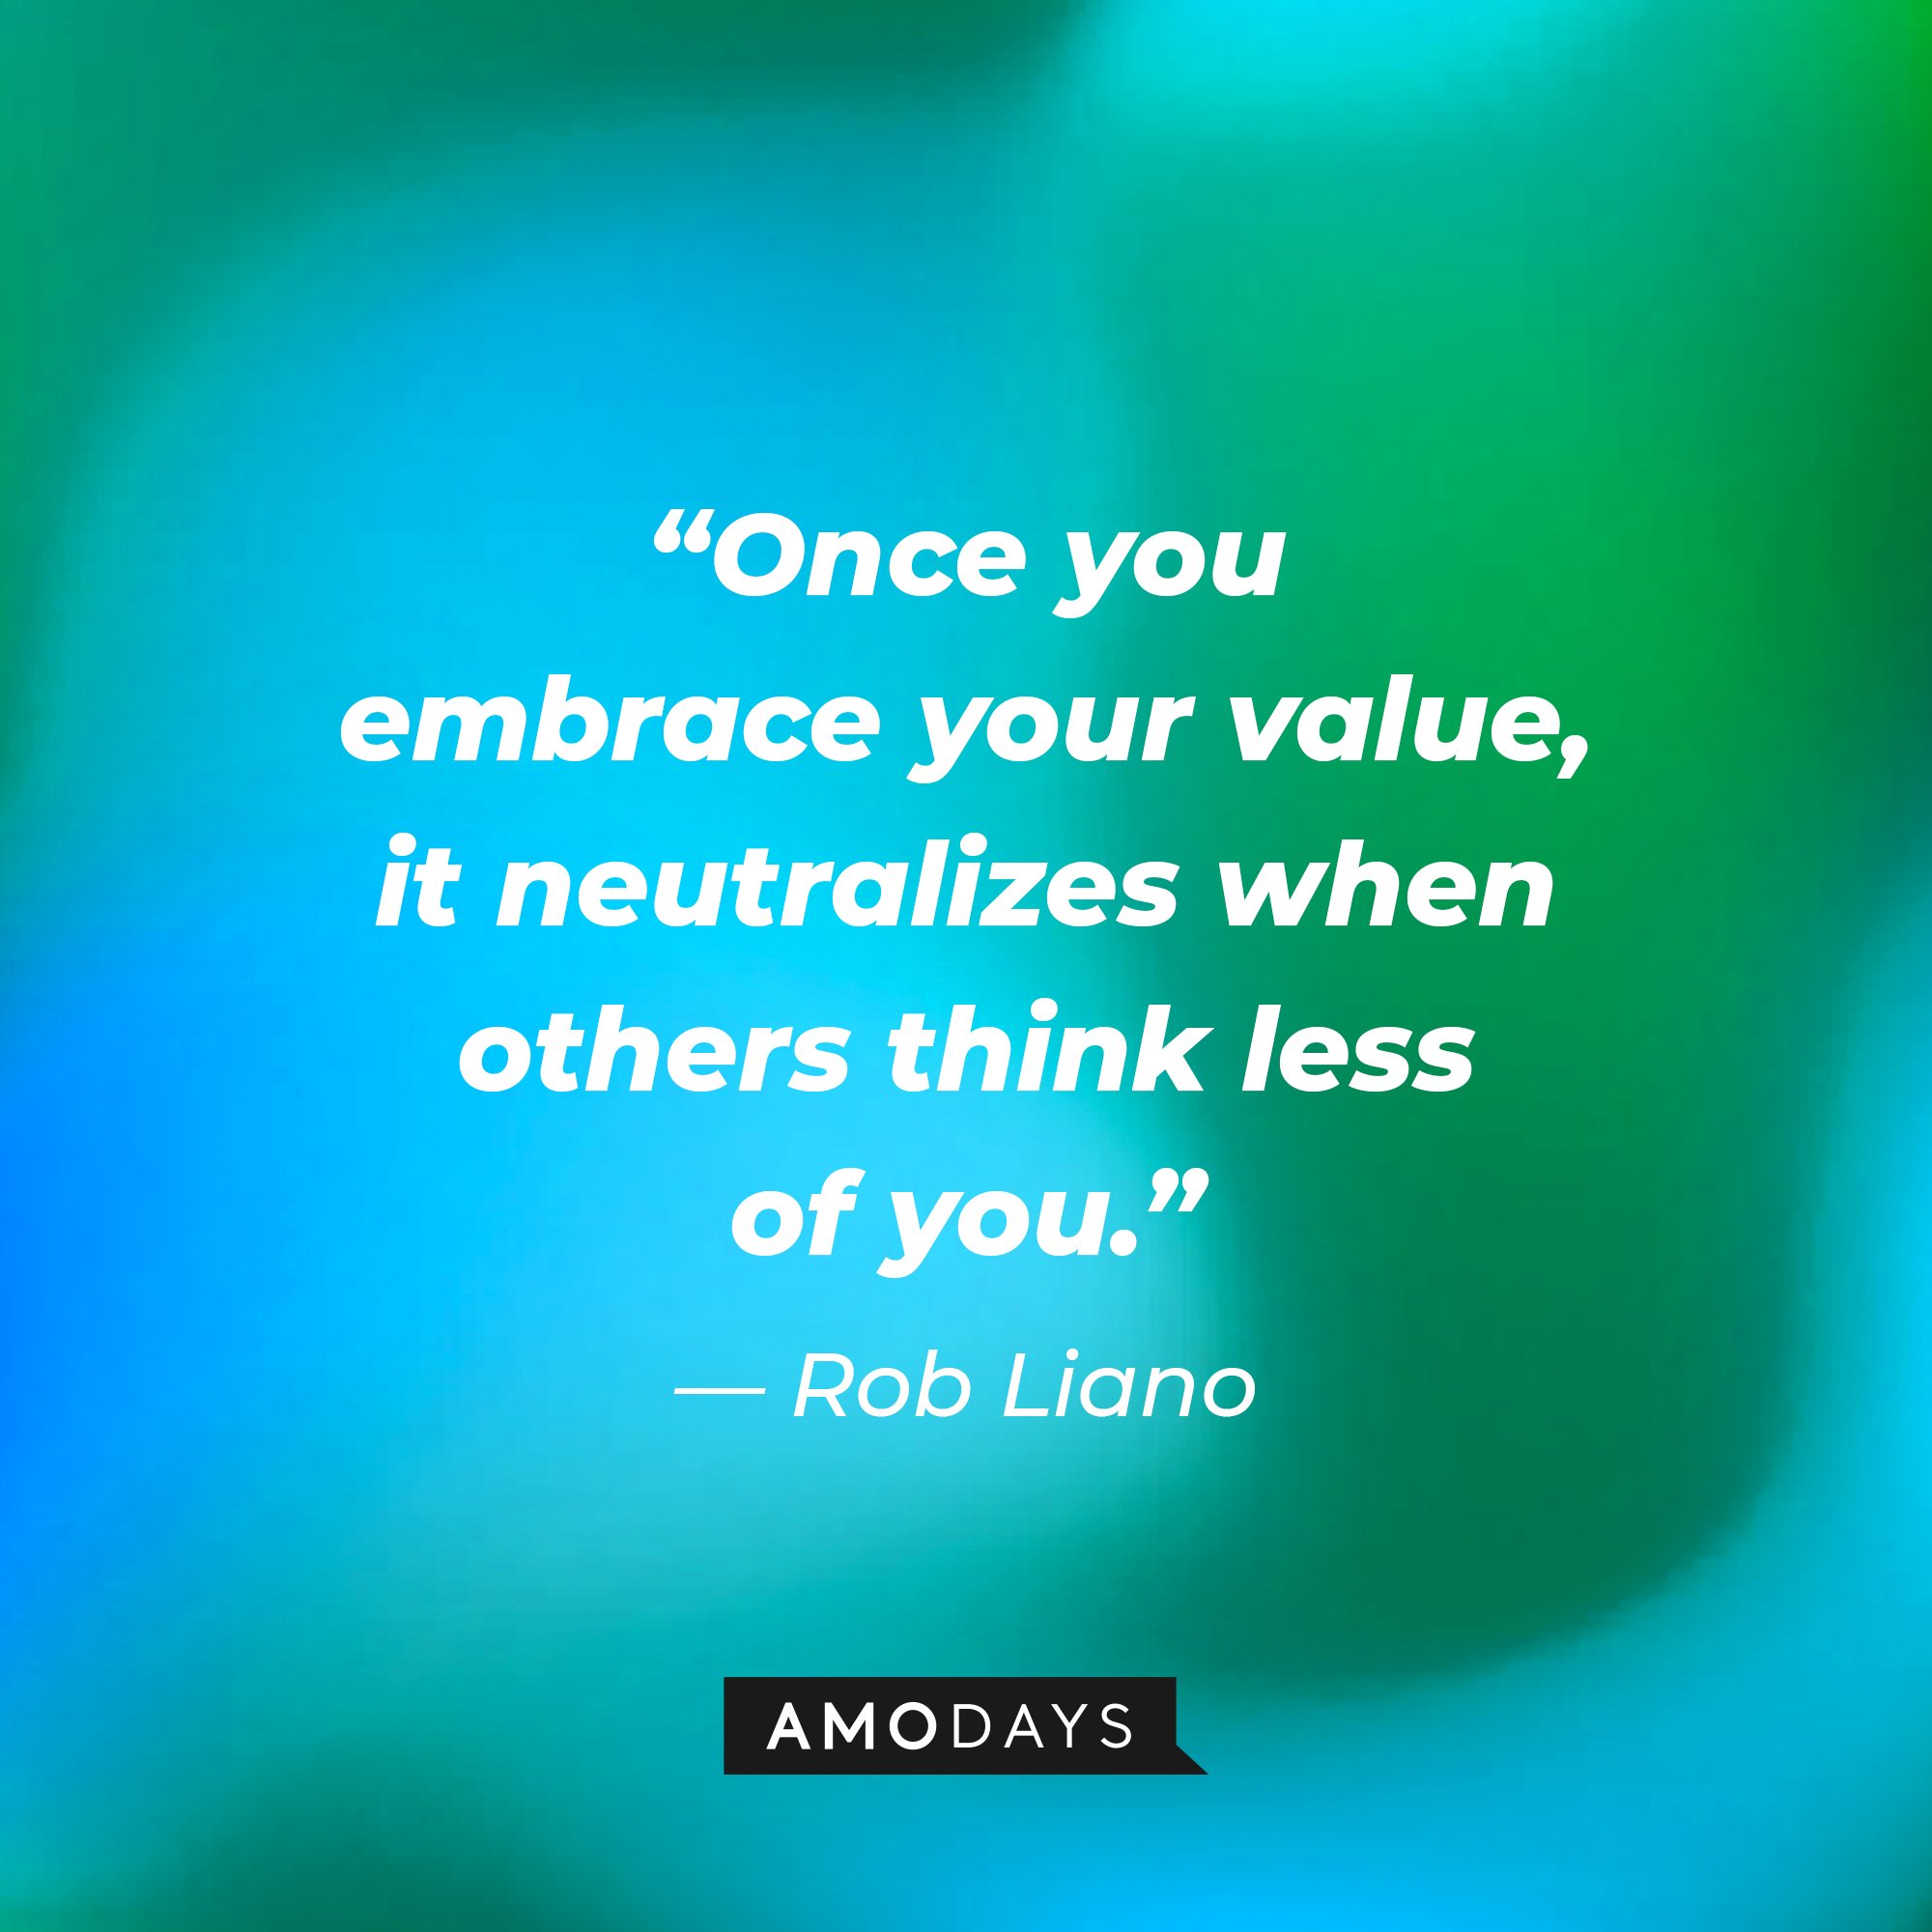 Rob Liano’s quote: “Once you embrace your value, it neutralizes when others think less of you.” | Image: AmoDays